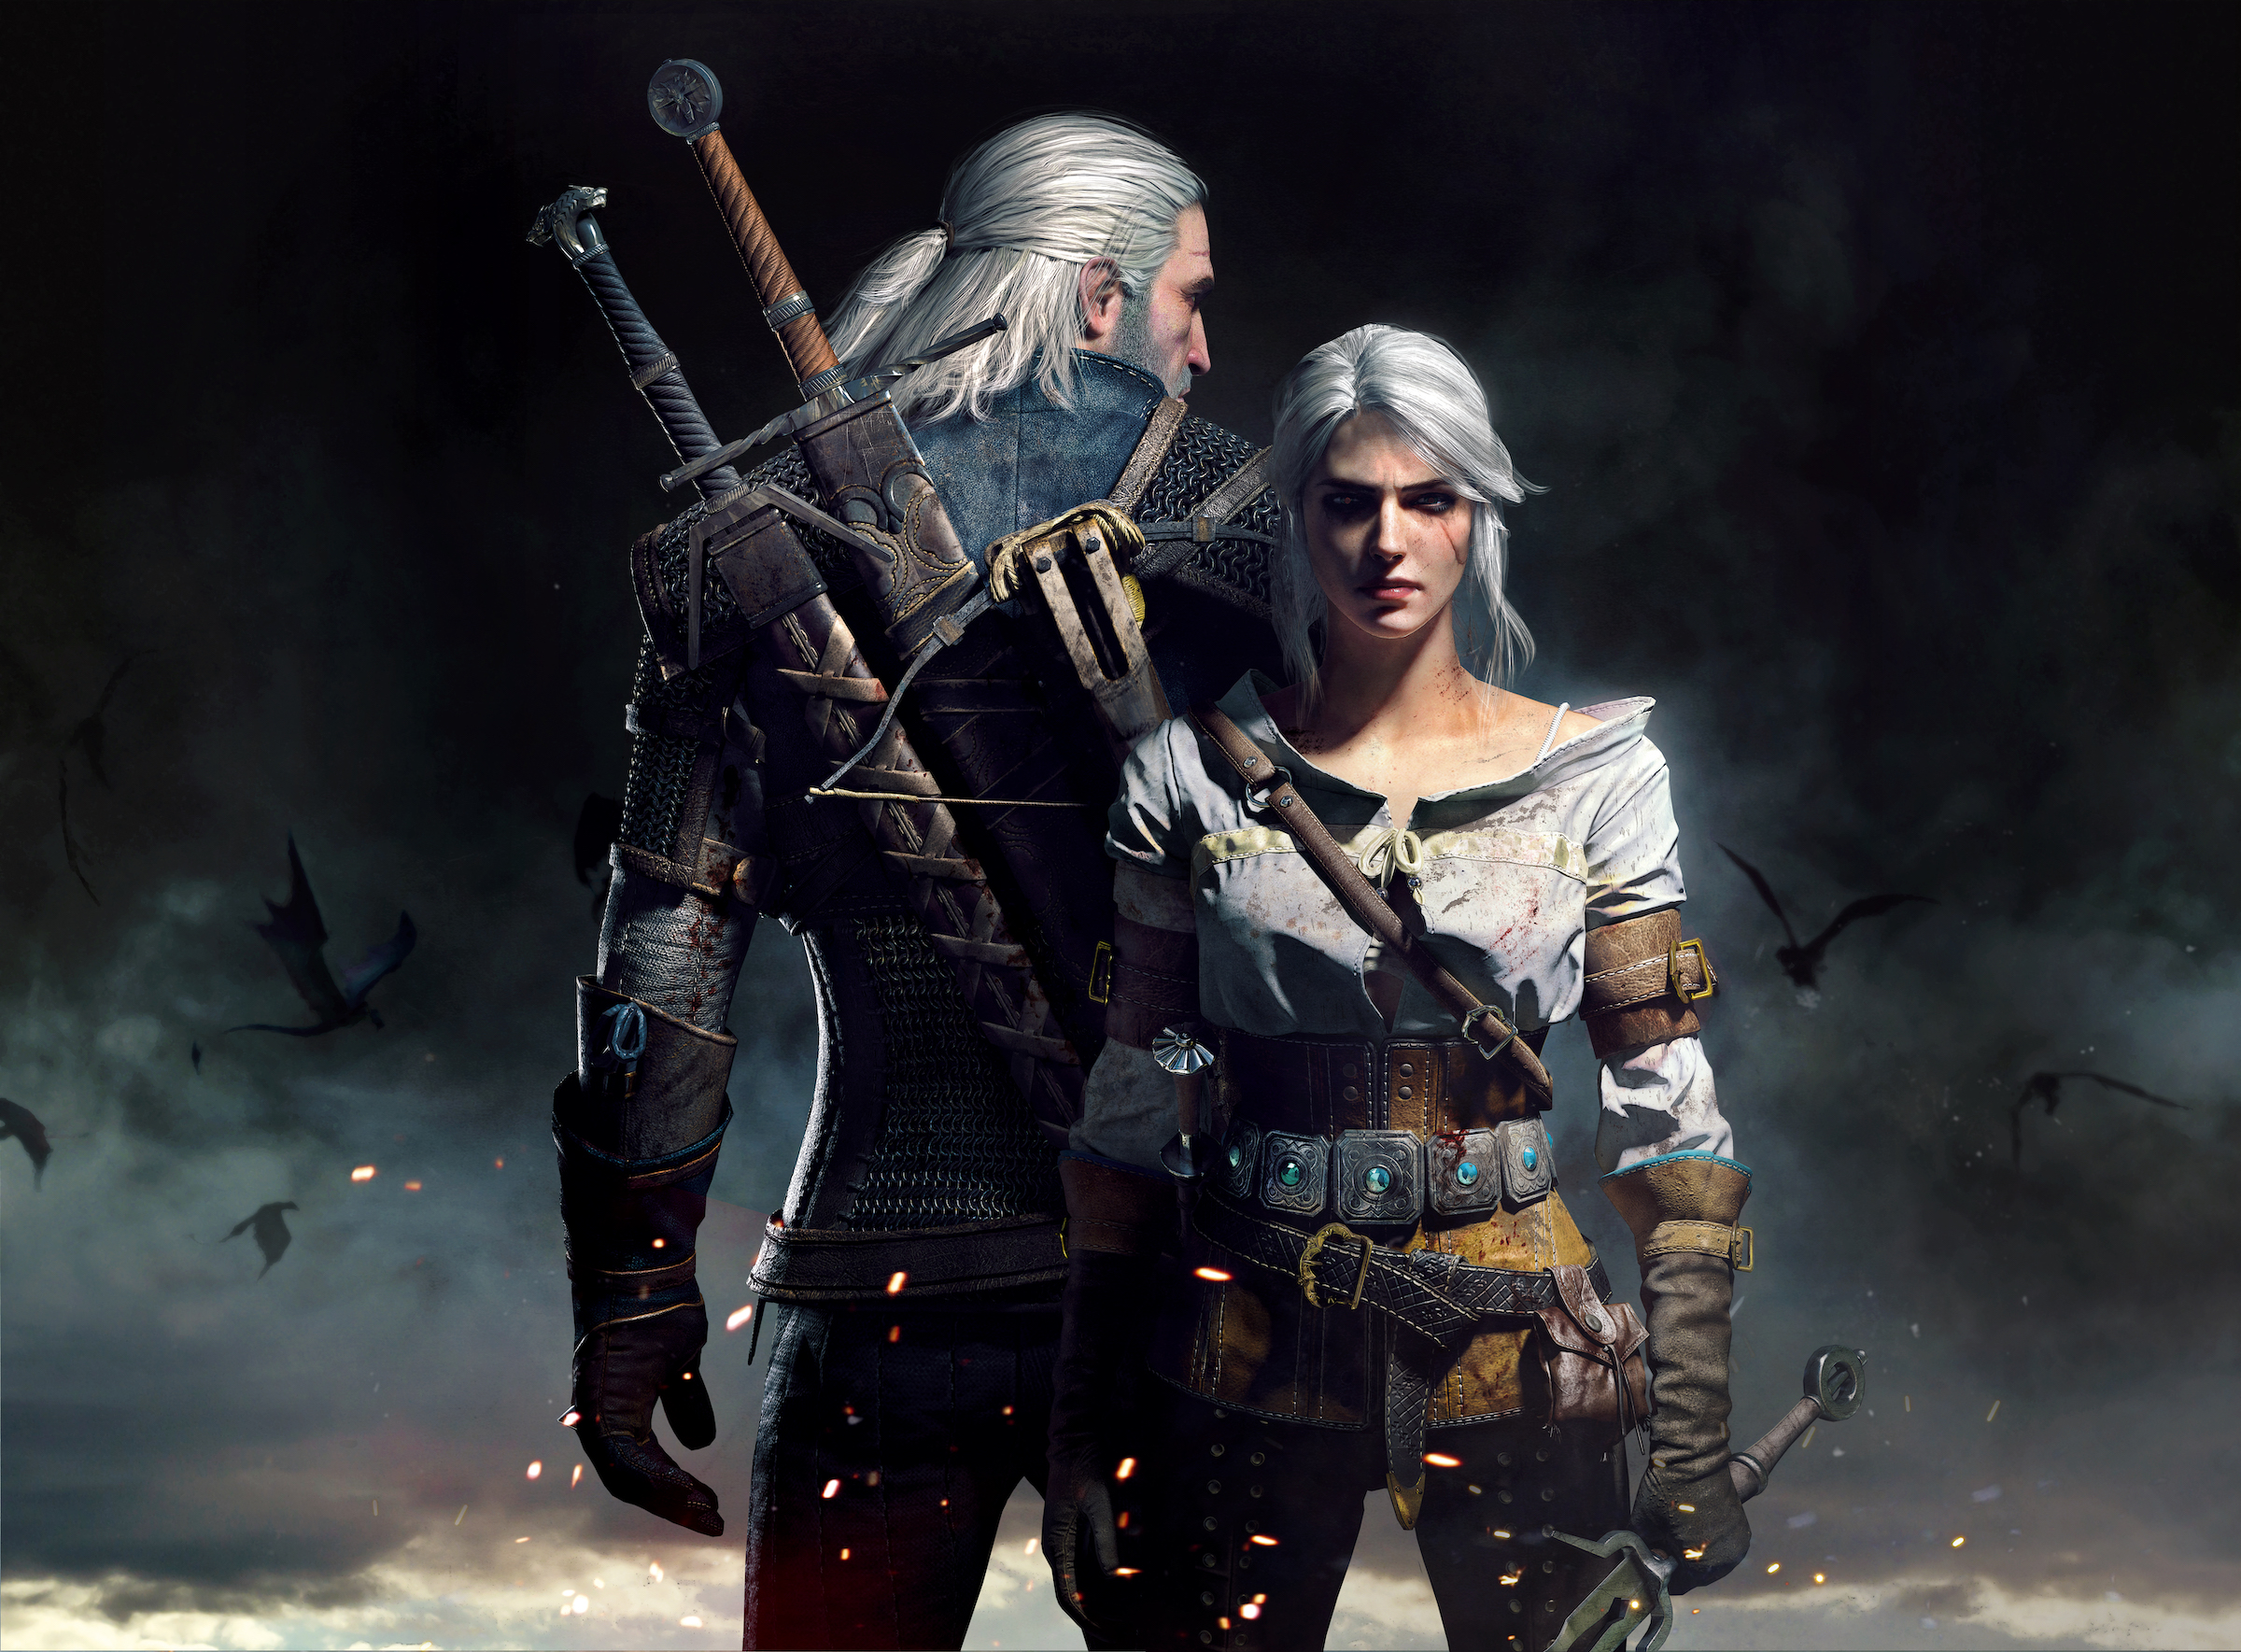 Geralt and Ciri standing back to back in artwork from The Witcher 3: Wild Hunt